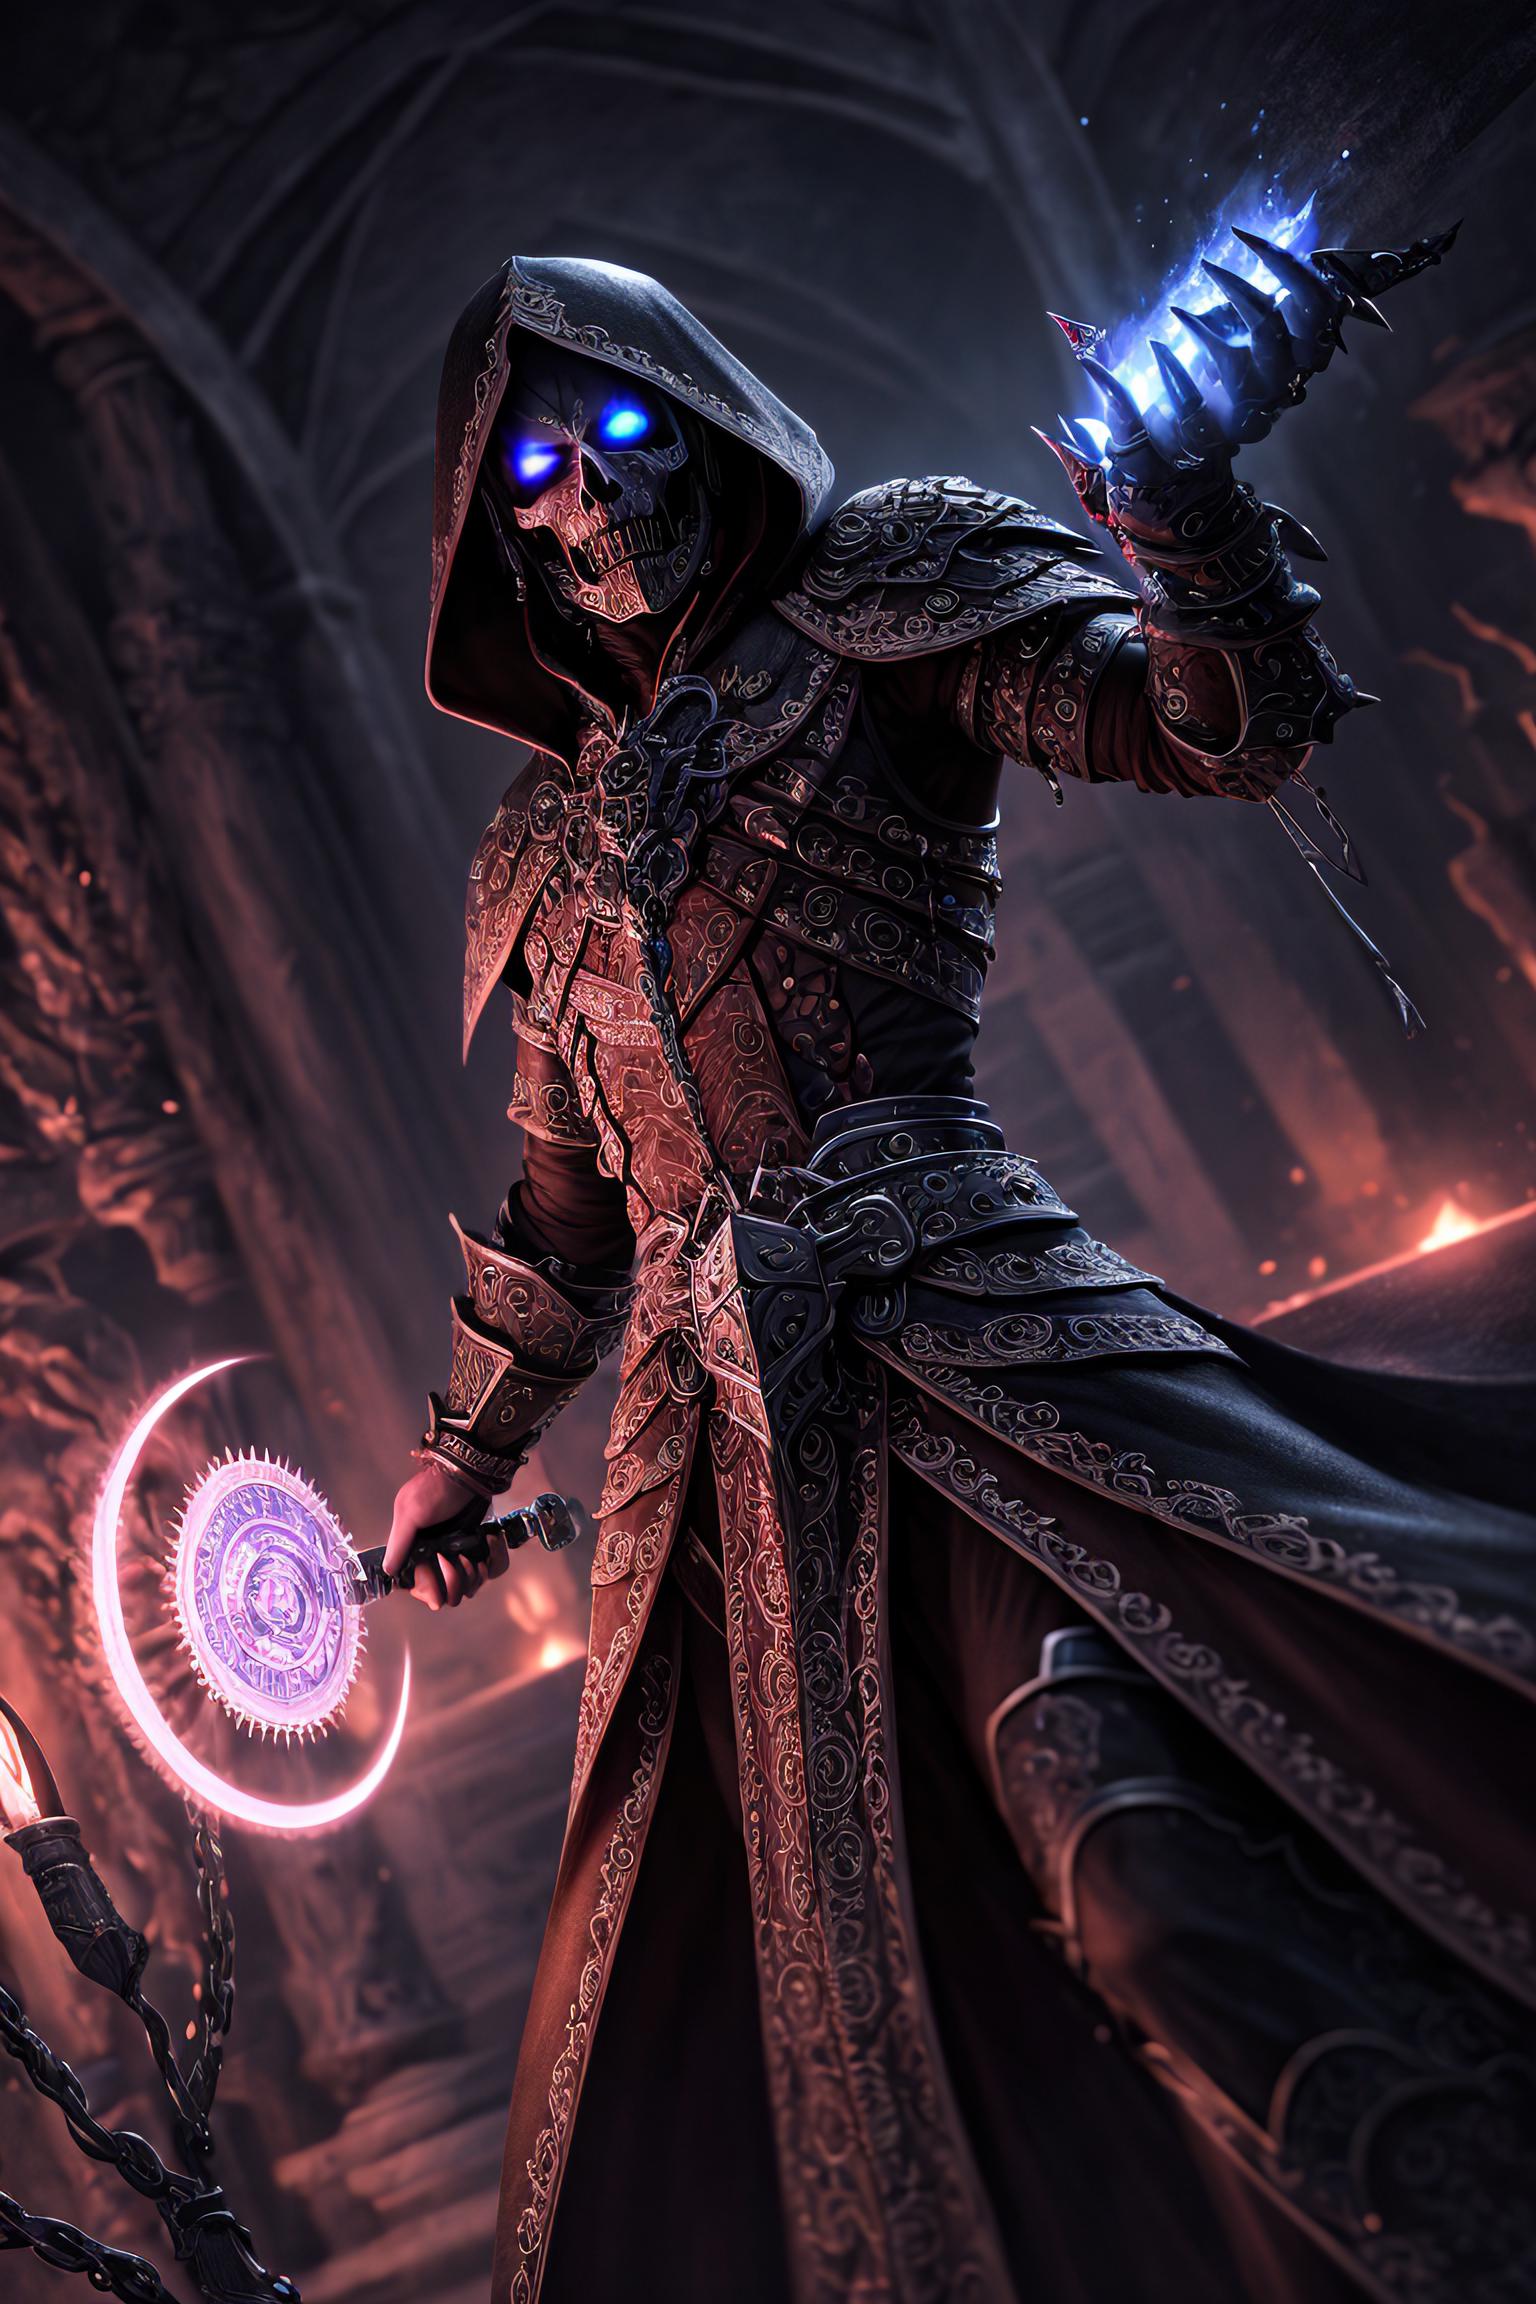 A character in a video game holds a circular weapon.